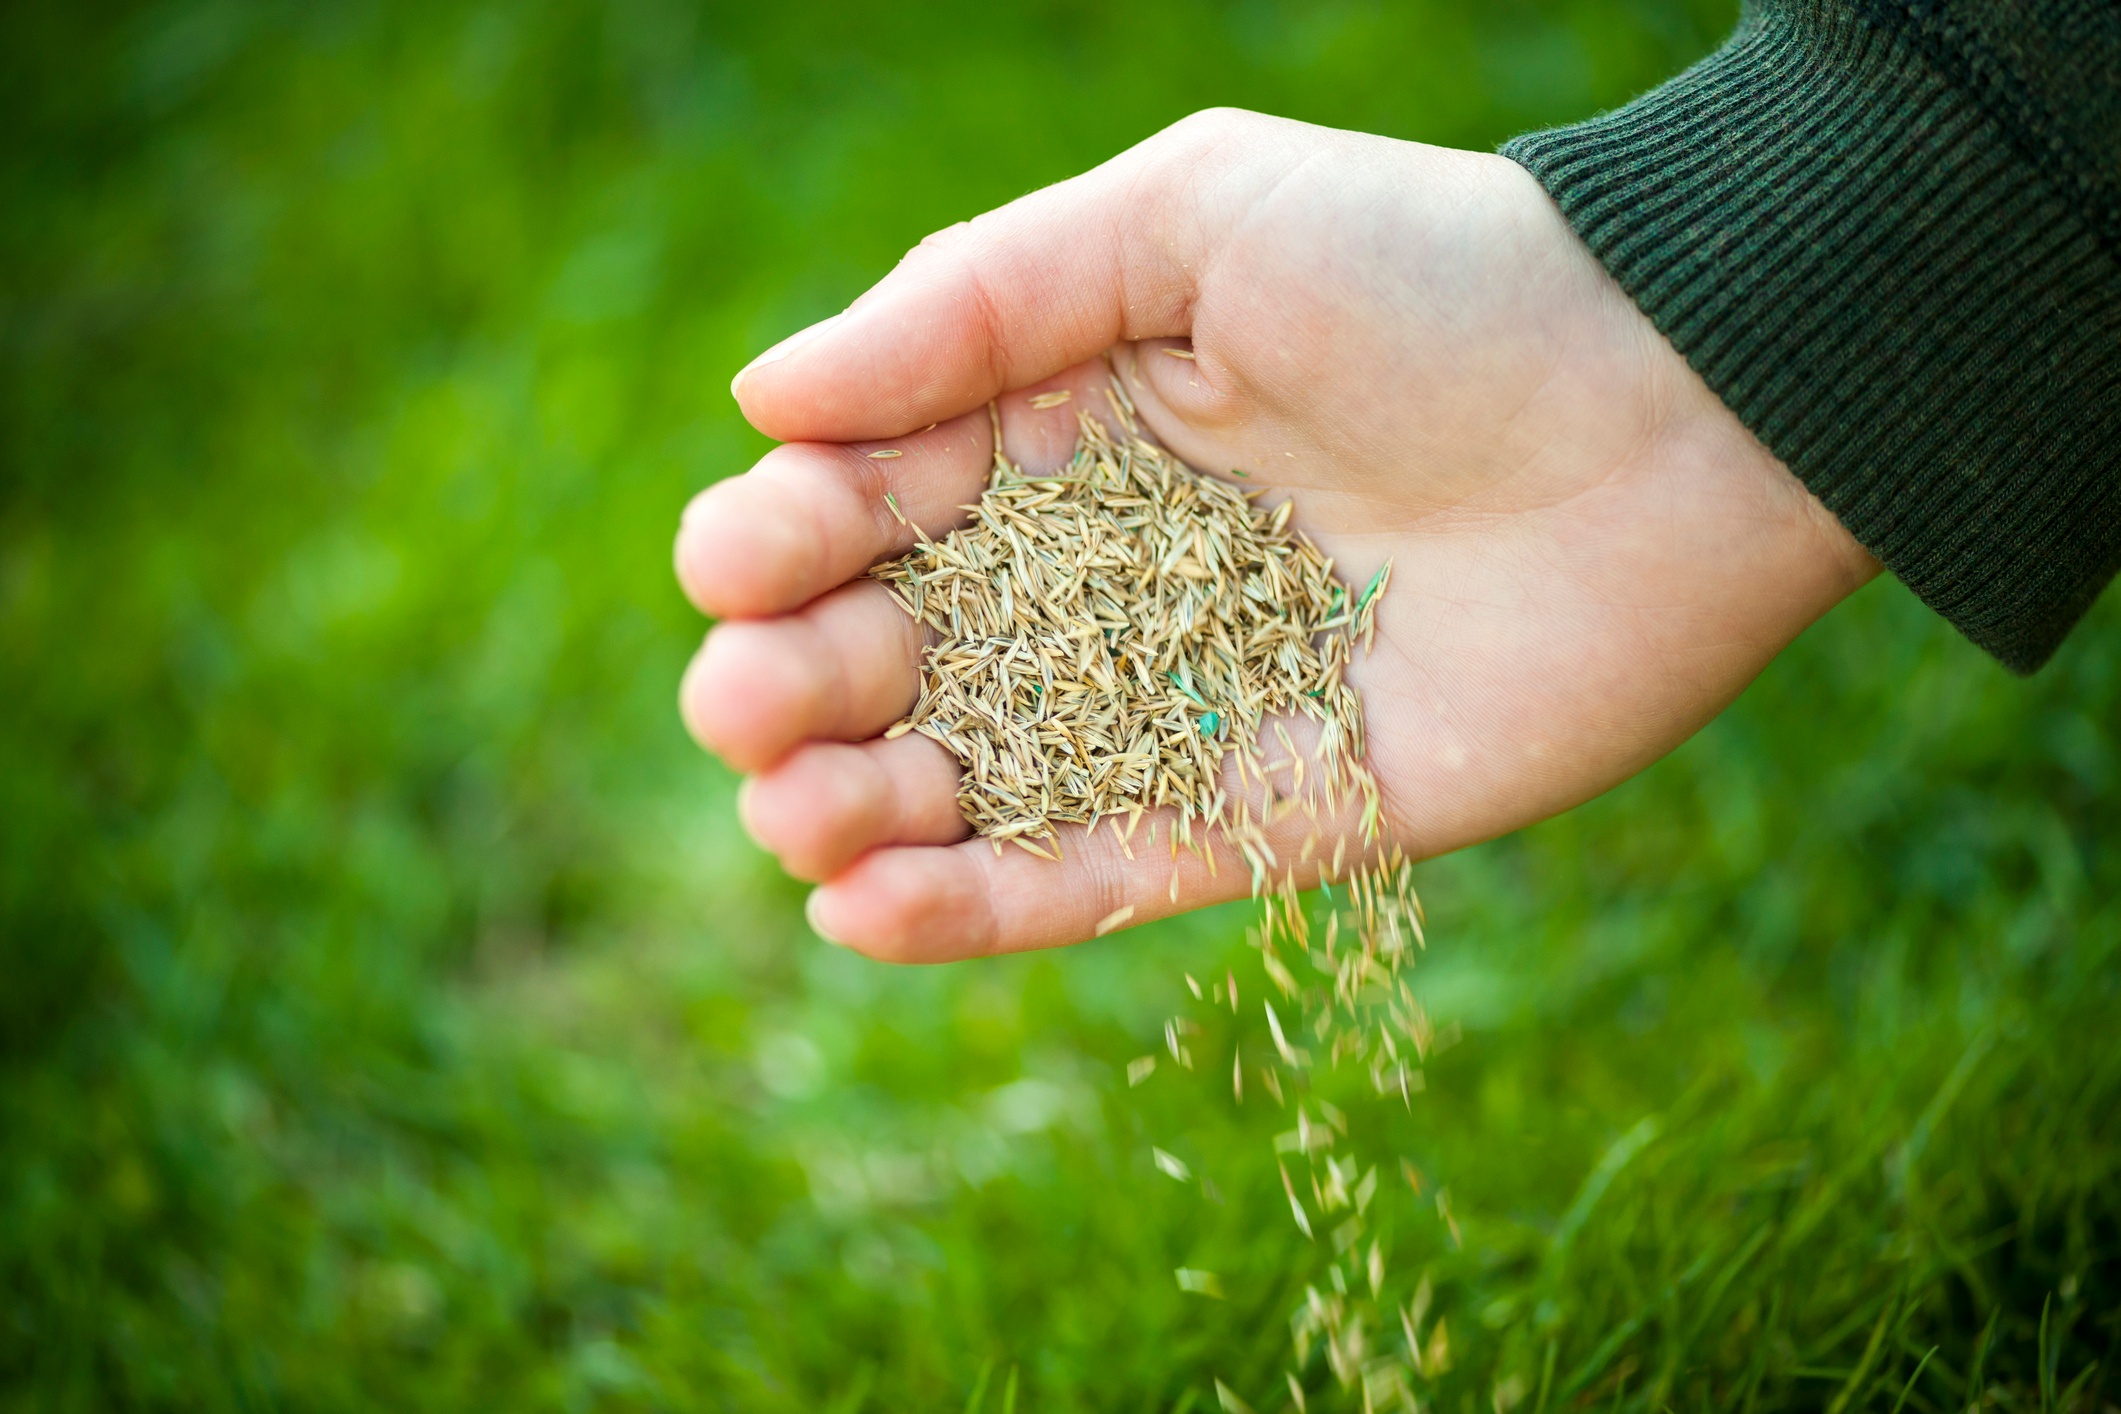 In order to get good results with any lawn seeding project, the seed must be in contact with soil.